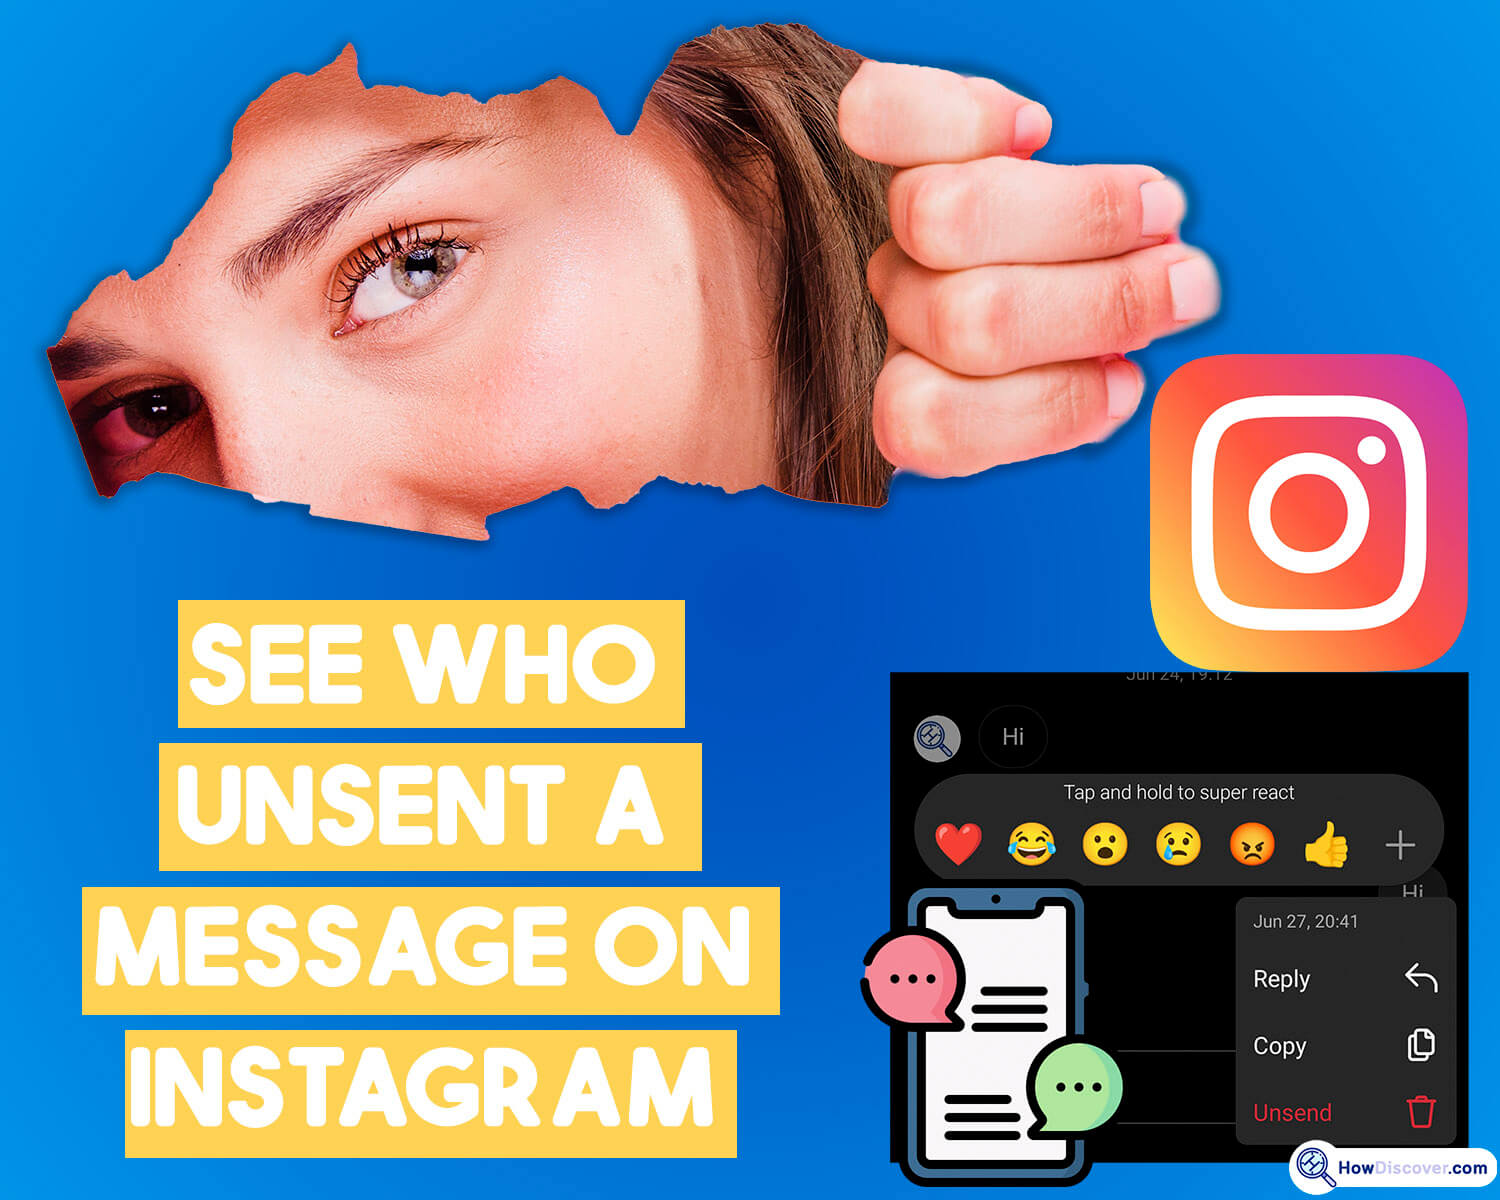 How To See Who Unsent a Message on Instagram